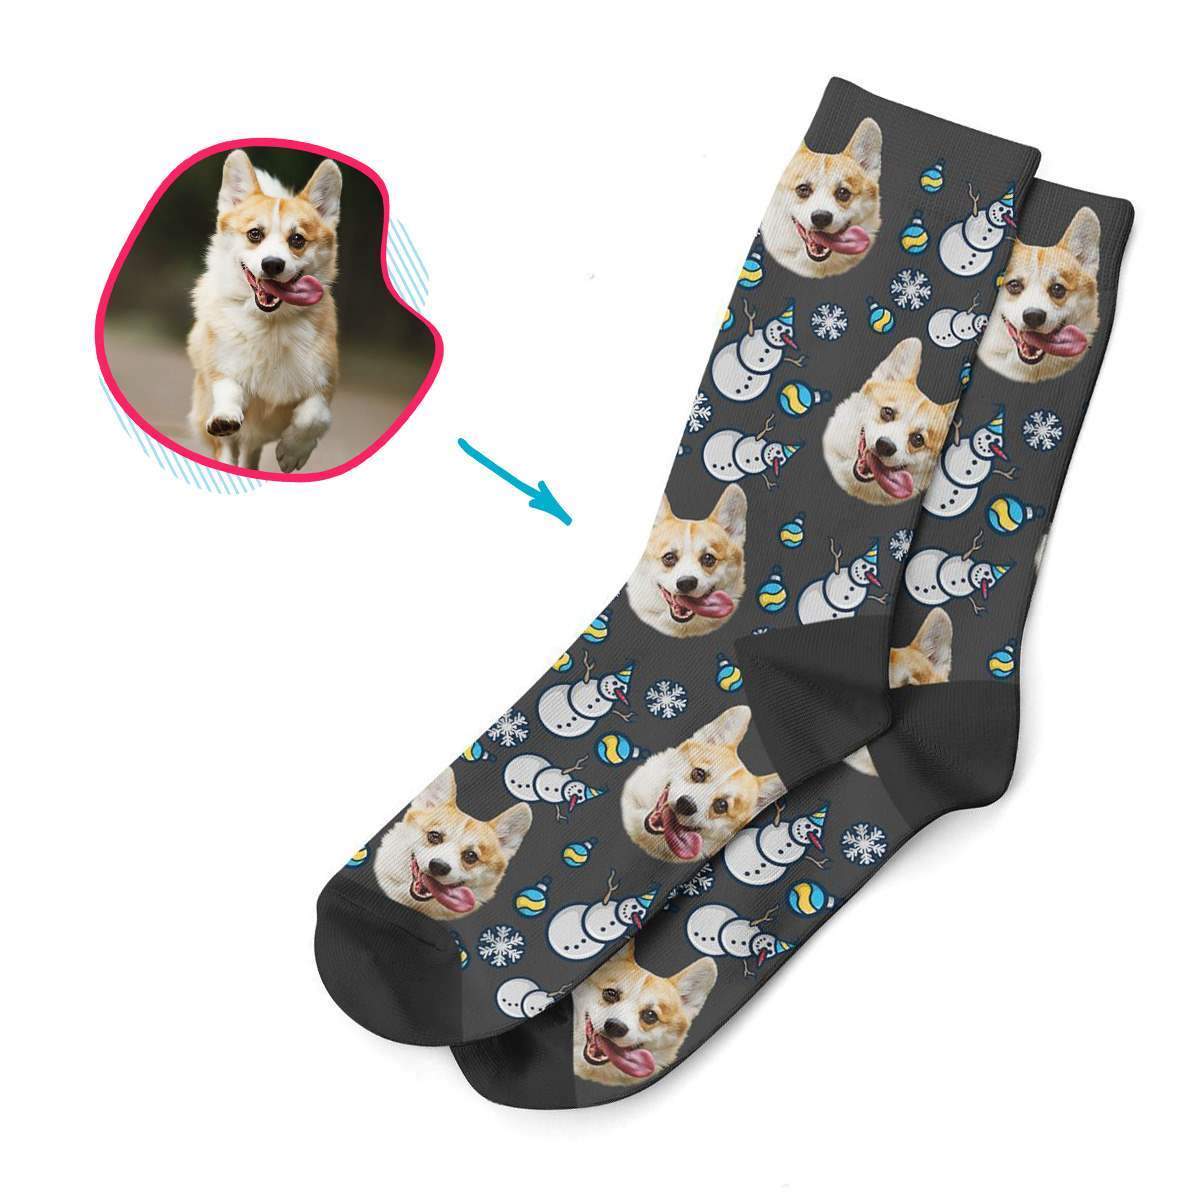 dark Snowman socks personalized with photo of face printed on them